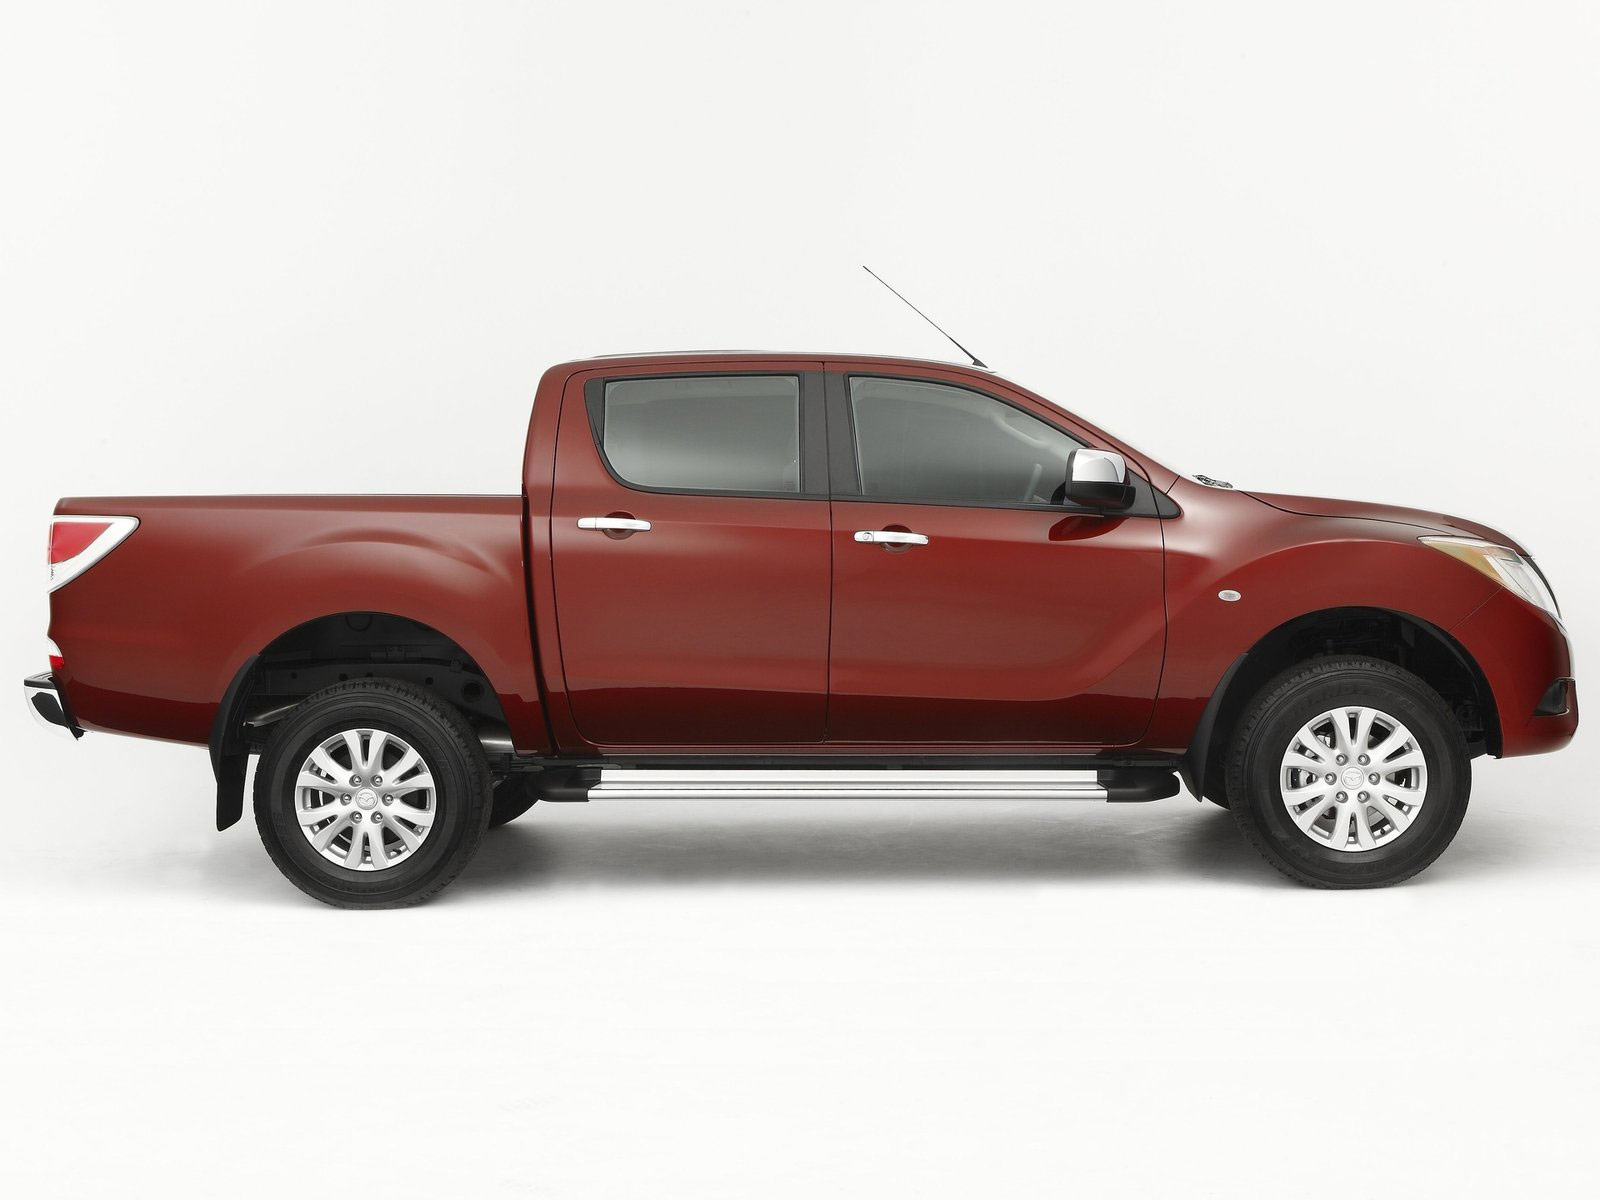 2012 MAZDA BT-50 car pictures | Accident lawyers information